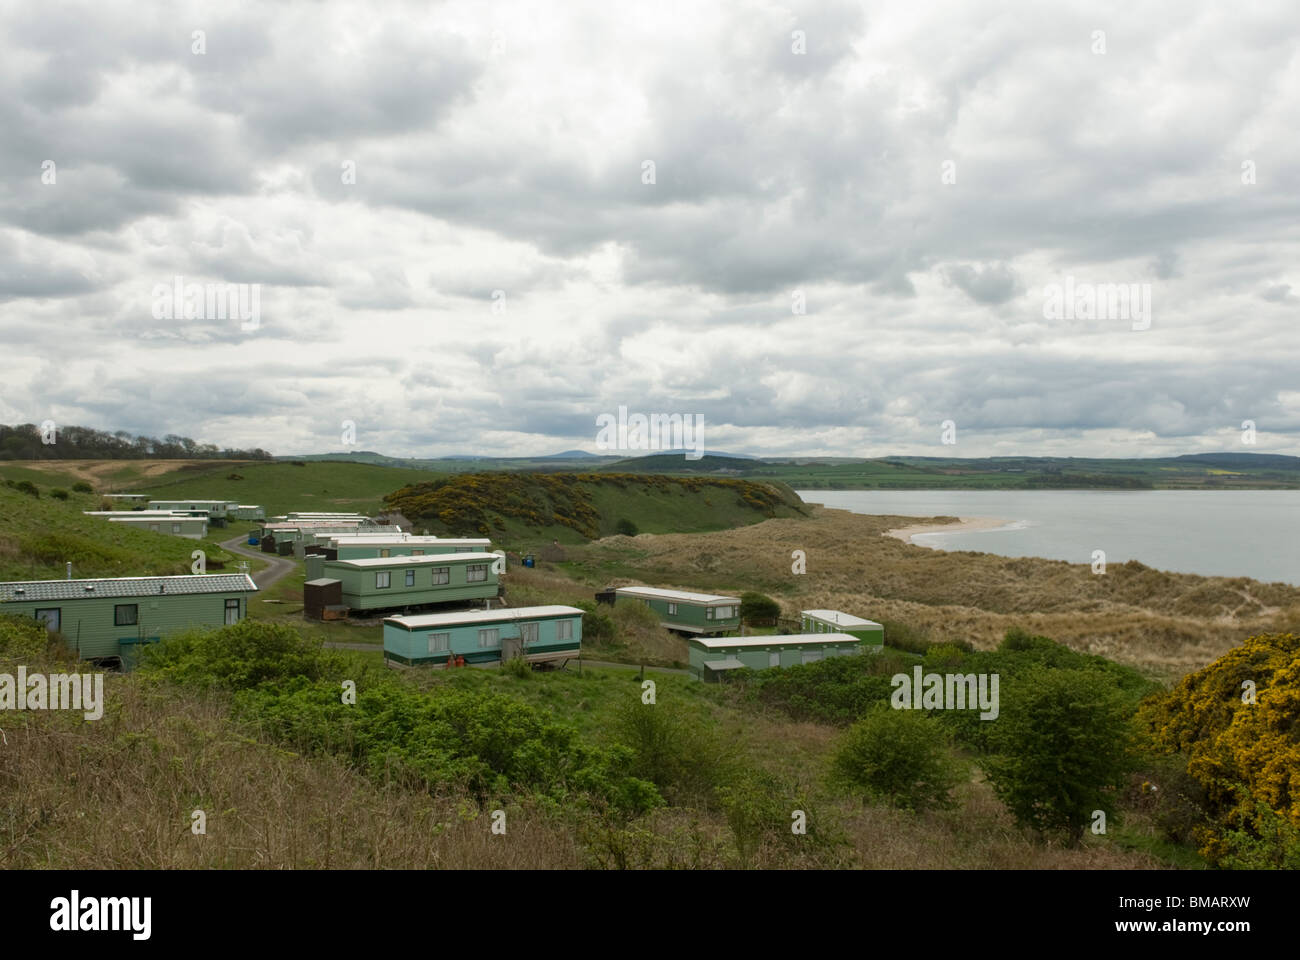 Budle Bay caravan site, Northumberland, Angleterre. Banque D'Images